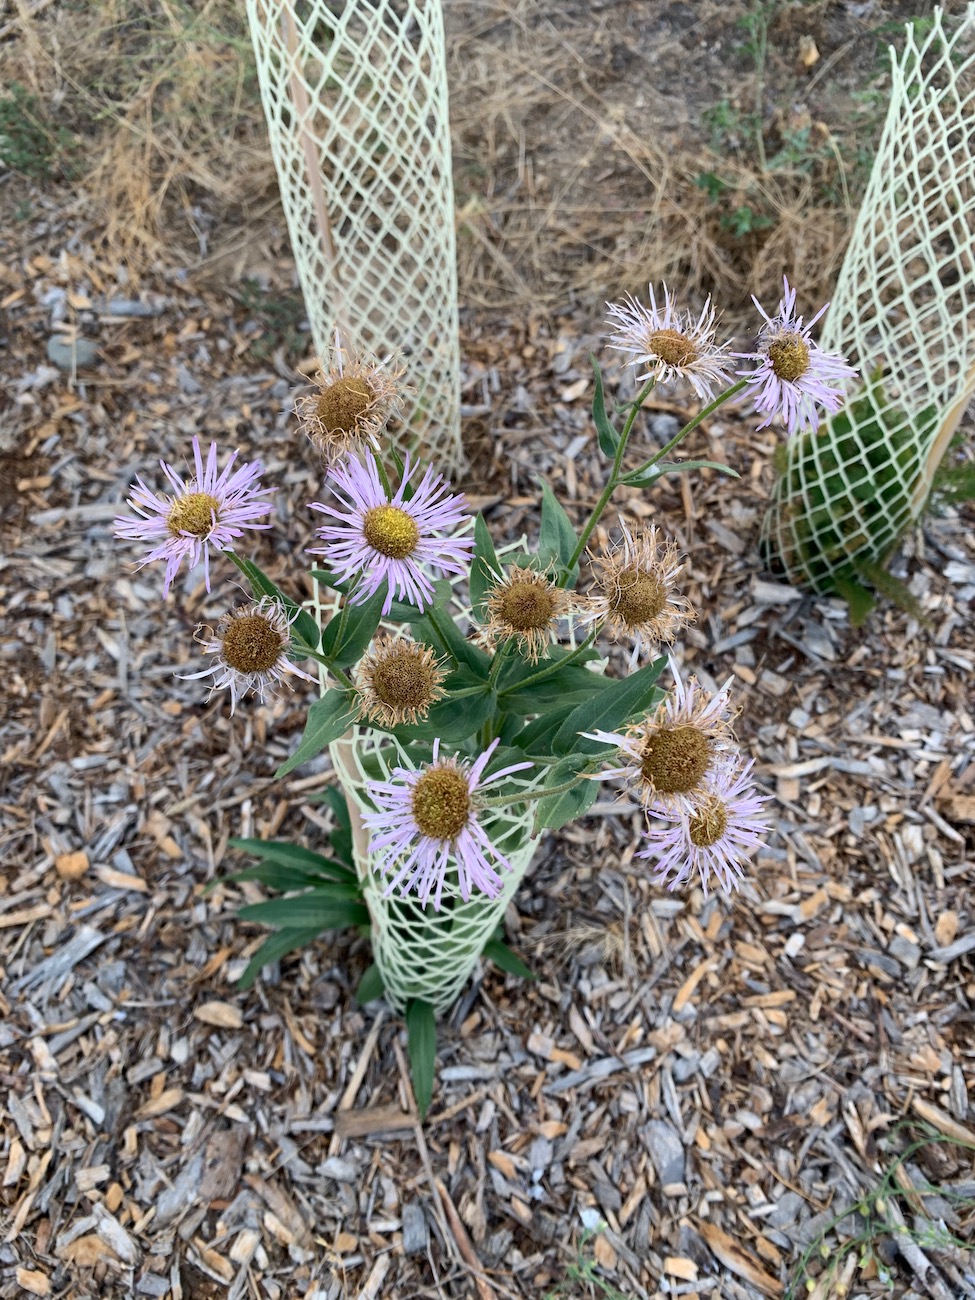 a plant with purple daisy-like flowers sprouts out above and around a protective mesh cage